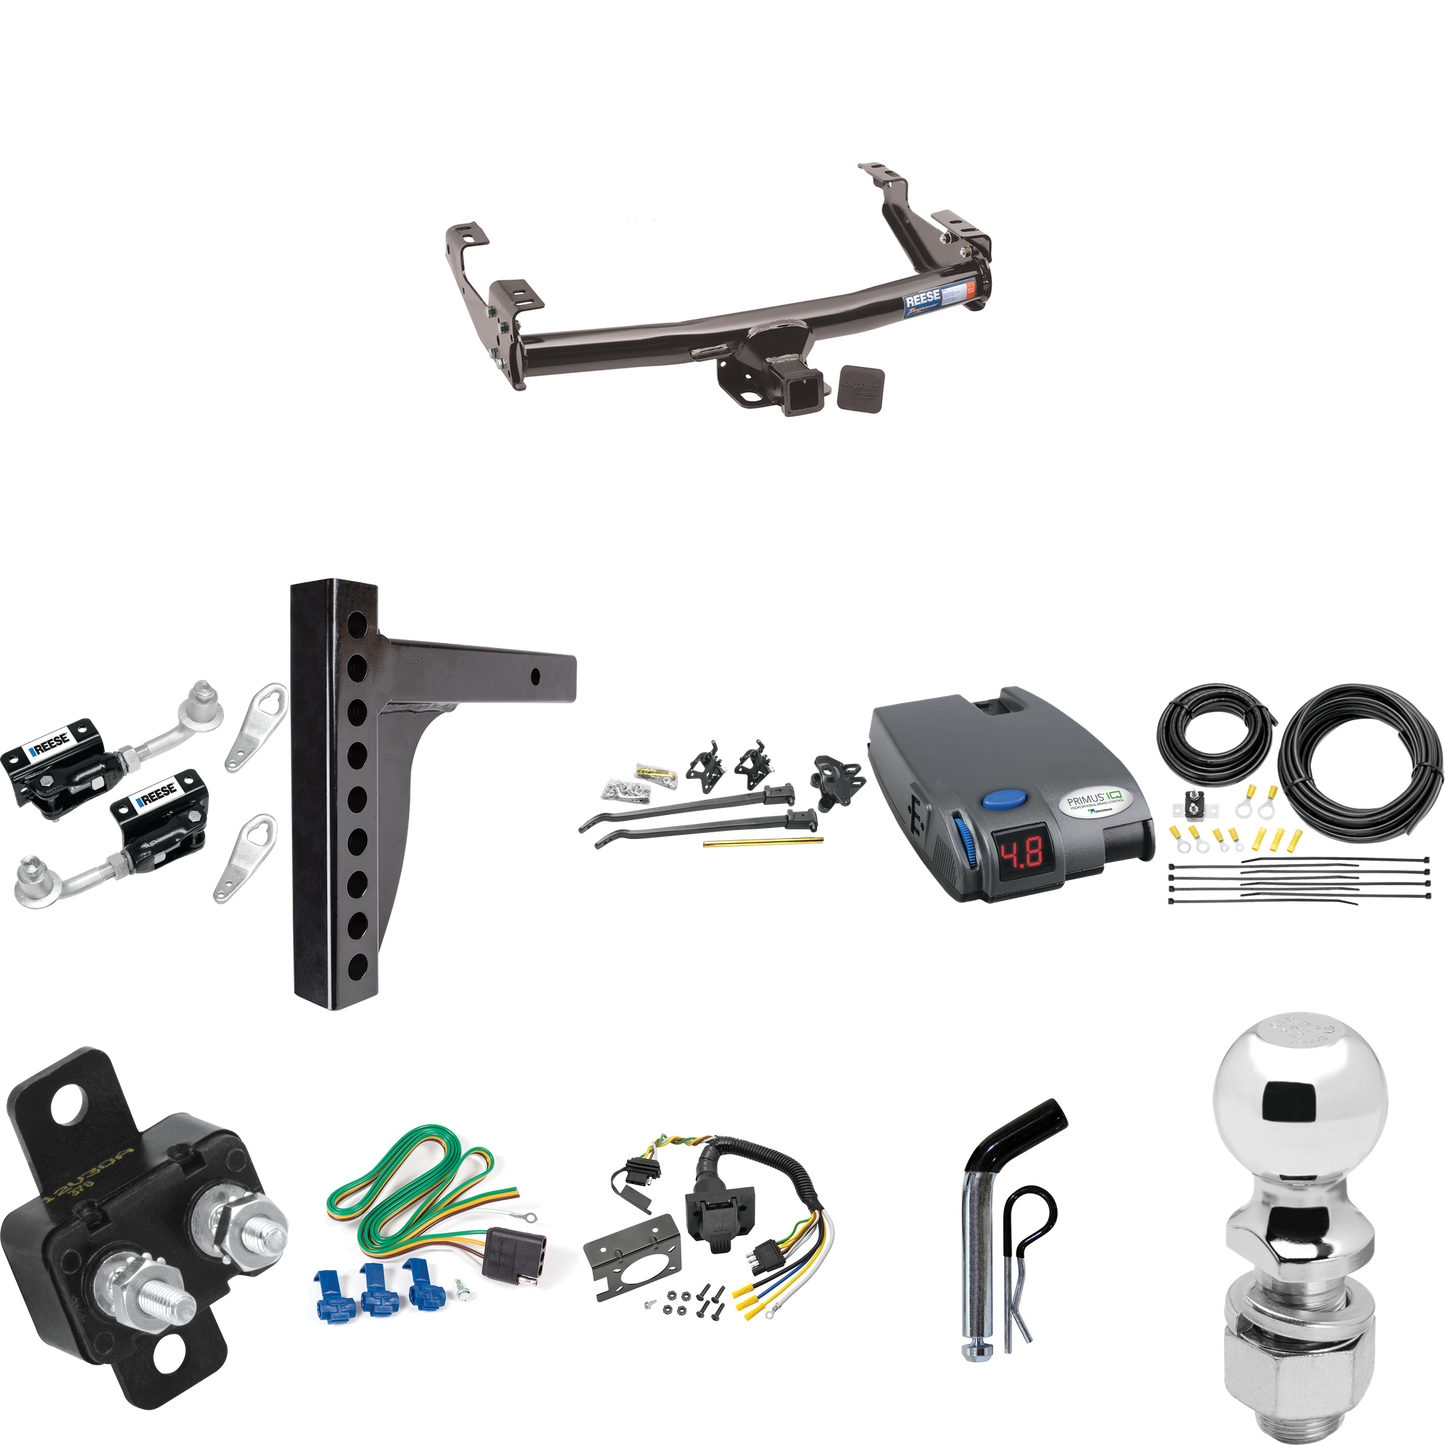 Fits 1971-1993 Dodge D250 Trailer Hitch Tow PKG w/ 12K Trunnion Bar Weight Distribution Hitch + Pin/Clip + Dual Cam Sway Control + 2-5/16" Ball + Tekonsha Primus IQ Brake Control + 7-Way RV Wiring By Reese Towpower